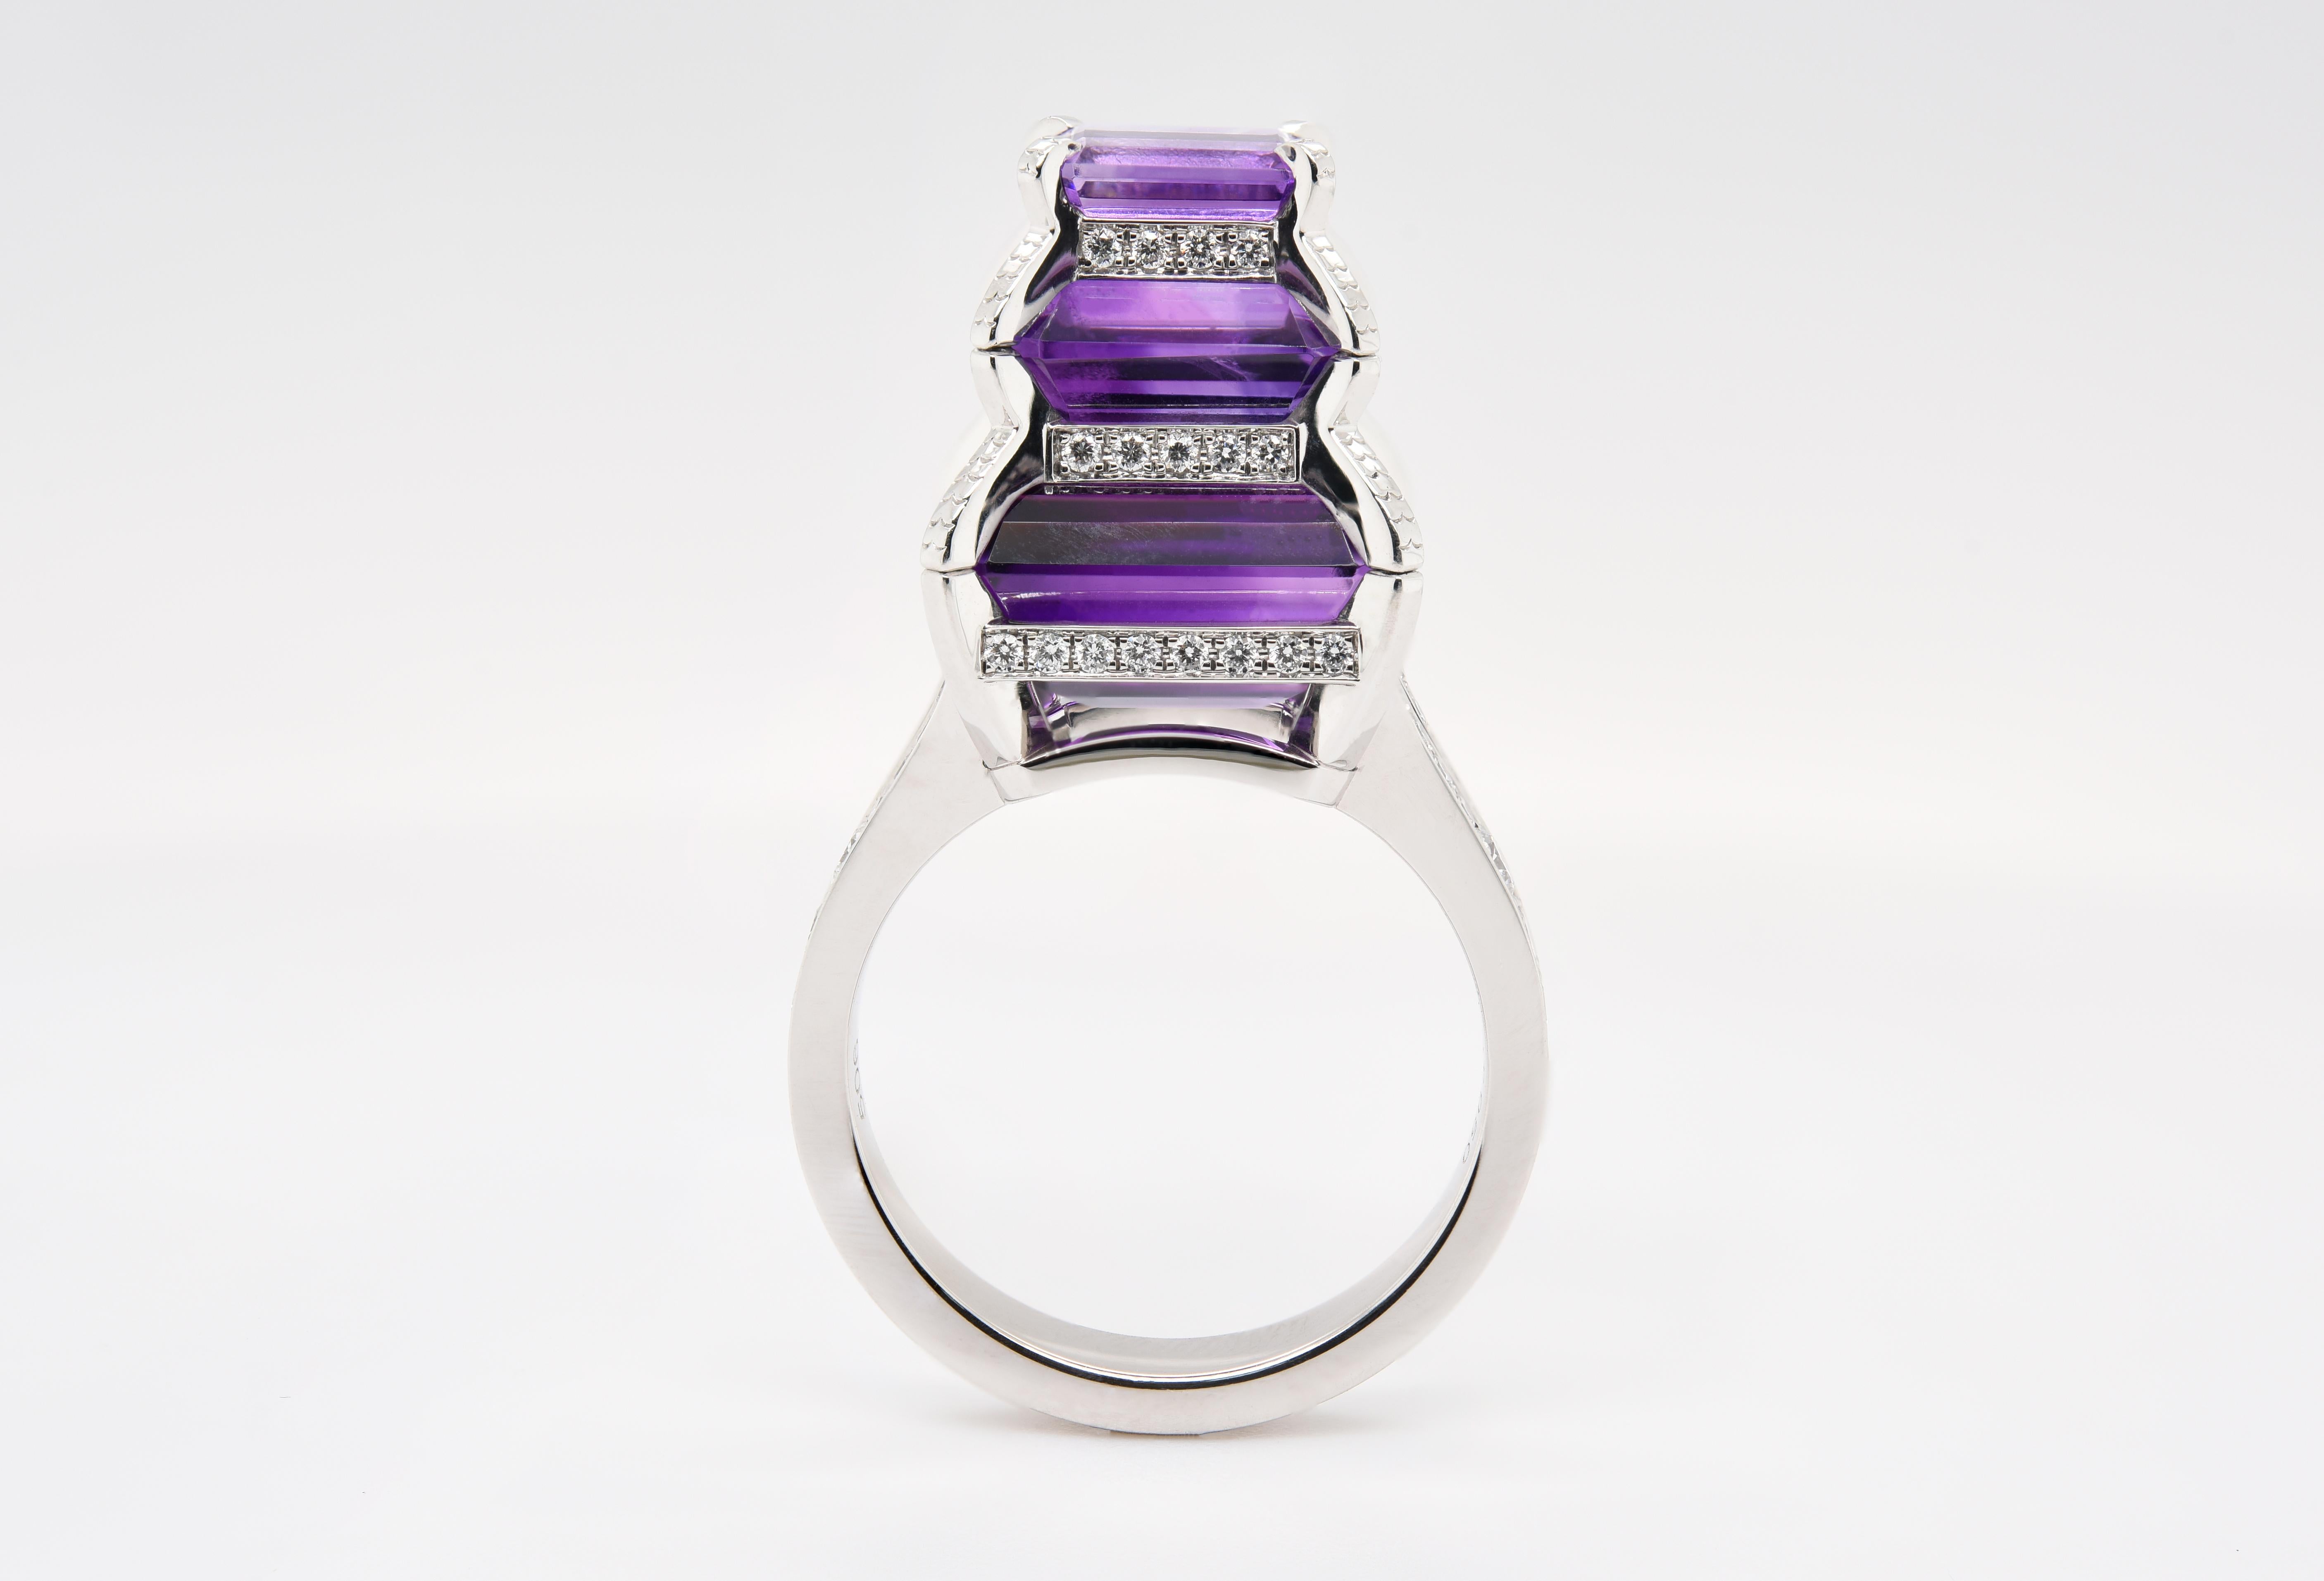 This unique Diamond and Emerald Shaped Amethyst Temple Ring is an inspiration from temples found in Asia. With 7.75 carats in Amethyst and 76 diamonds and a total gemstone weight of over 8.25 carats all in platinum you will most definitely be the